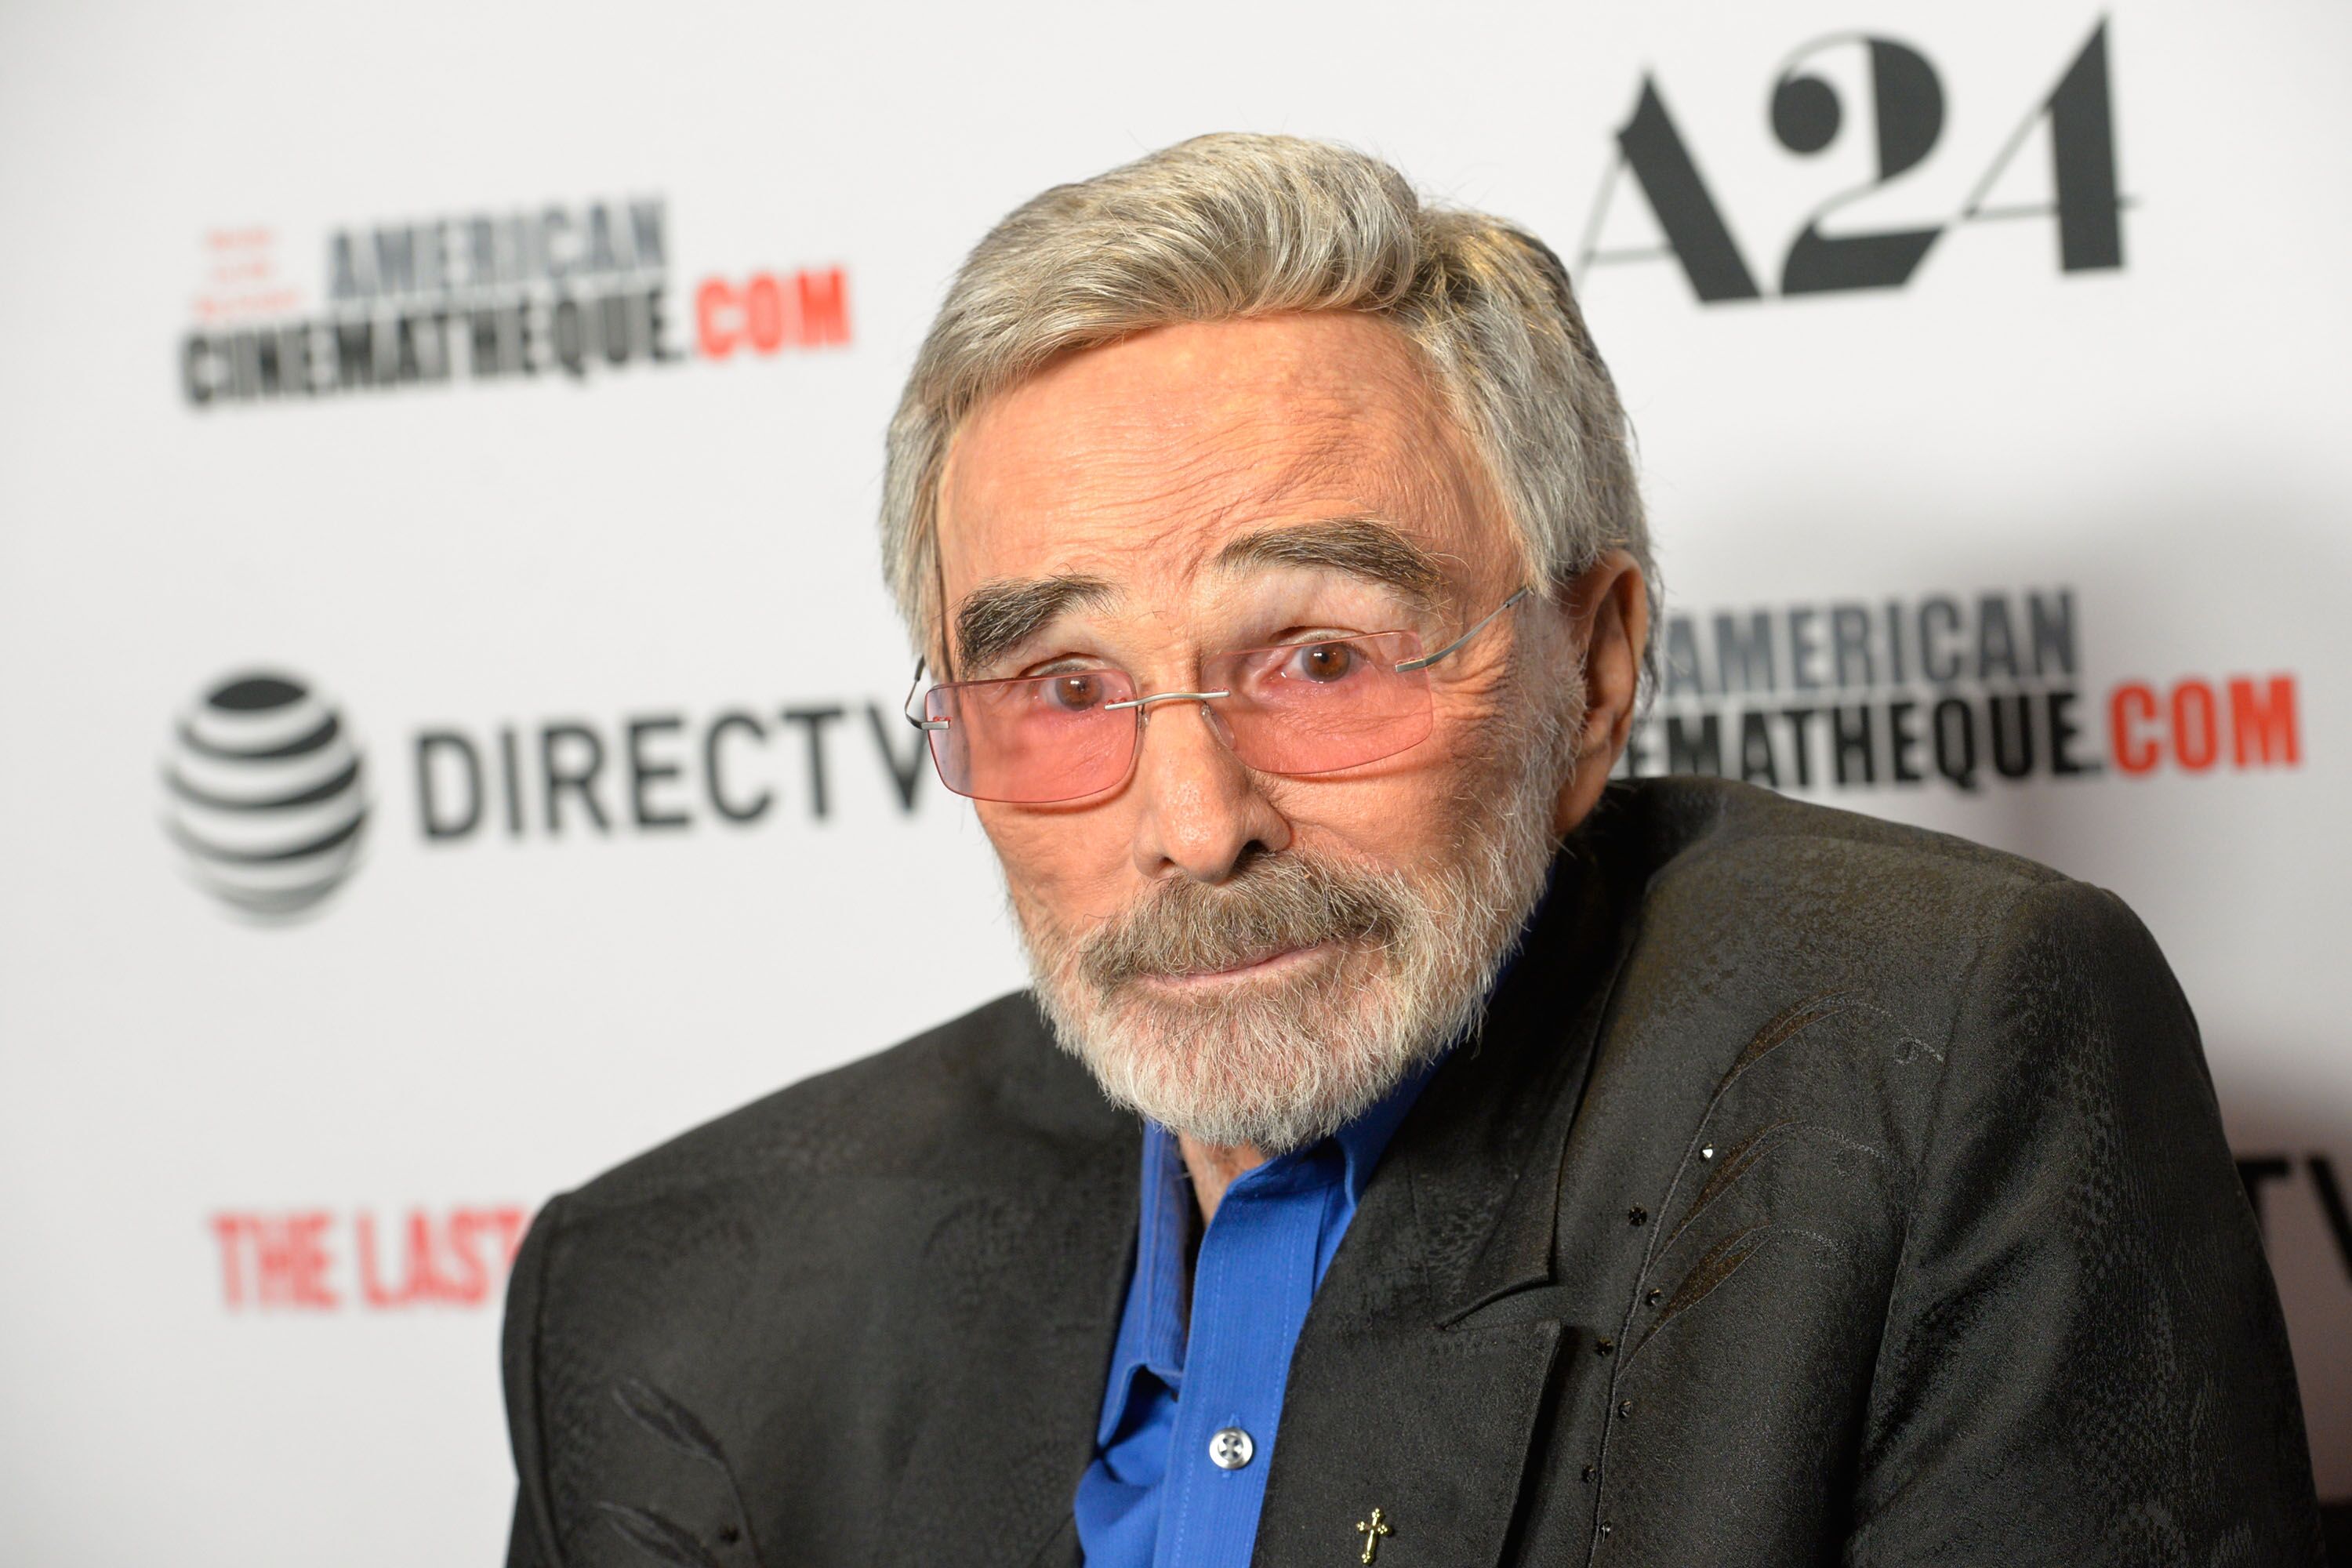 Burt Reynolds attends the premiere of "The Last Movie Star." | Source: Getty Images